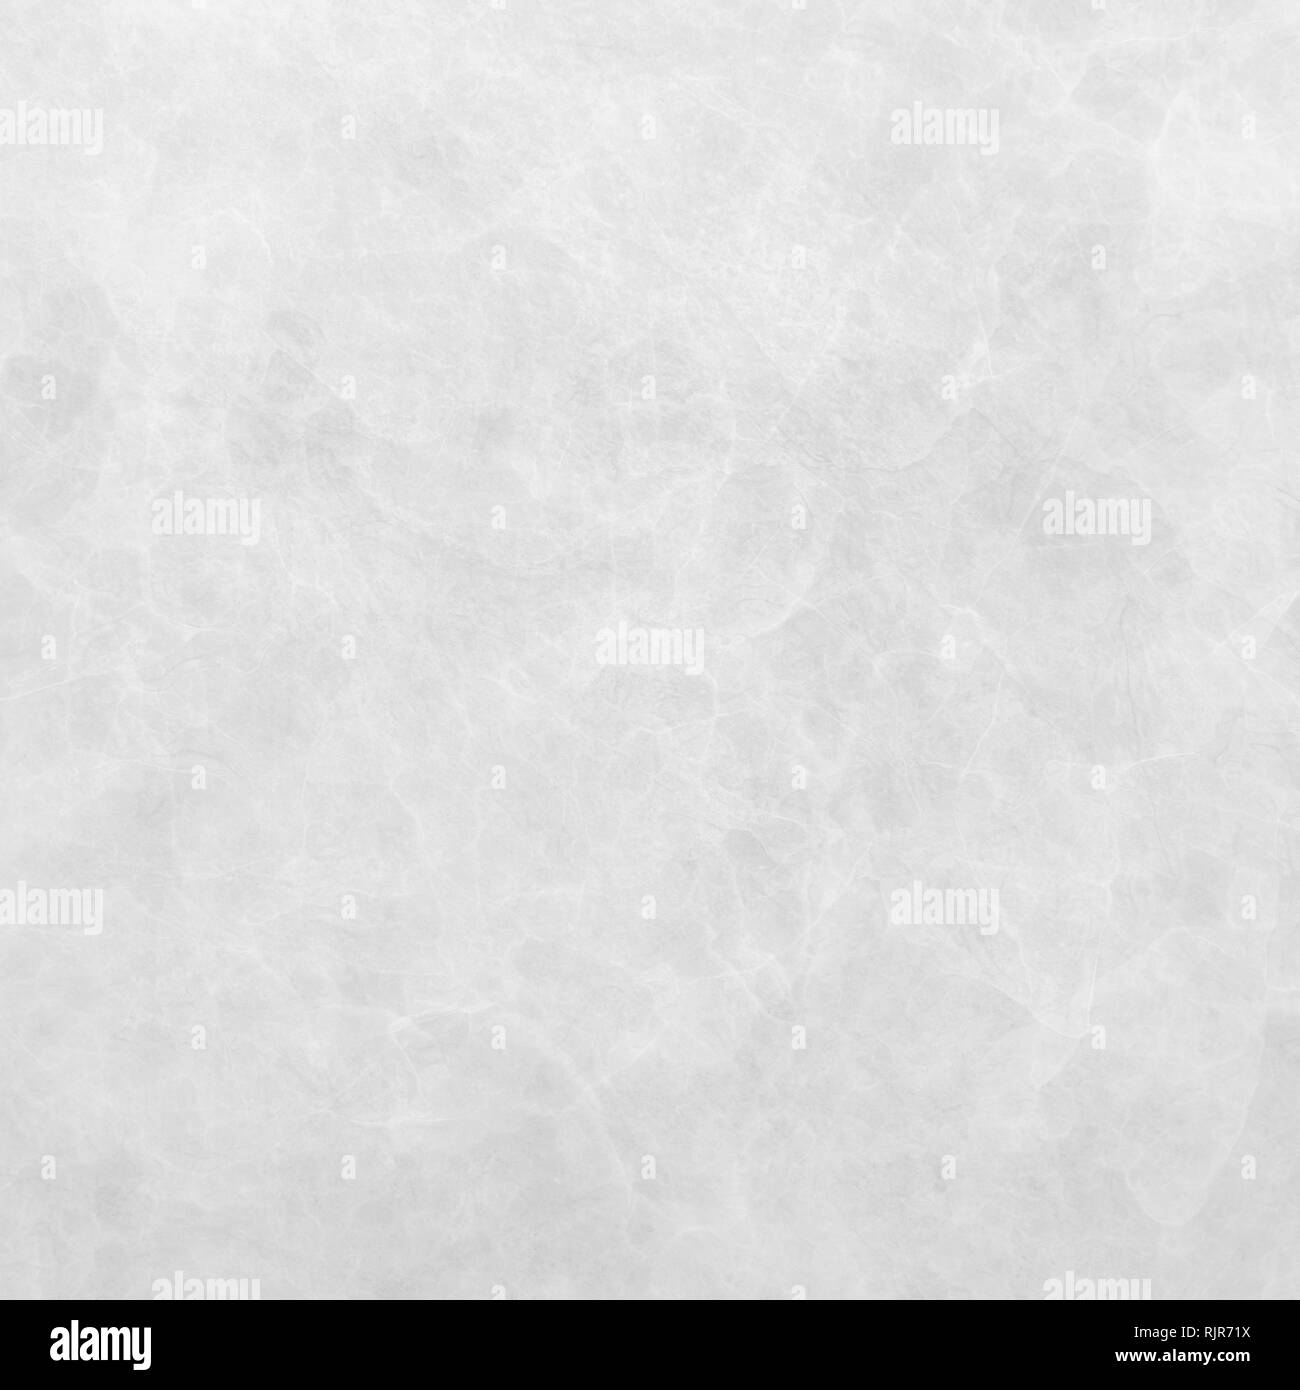 white background with crackled marbled vintage grunge texture, old white paper illustration Stock Photo